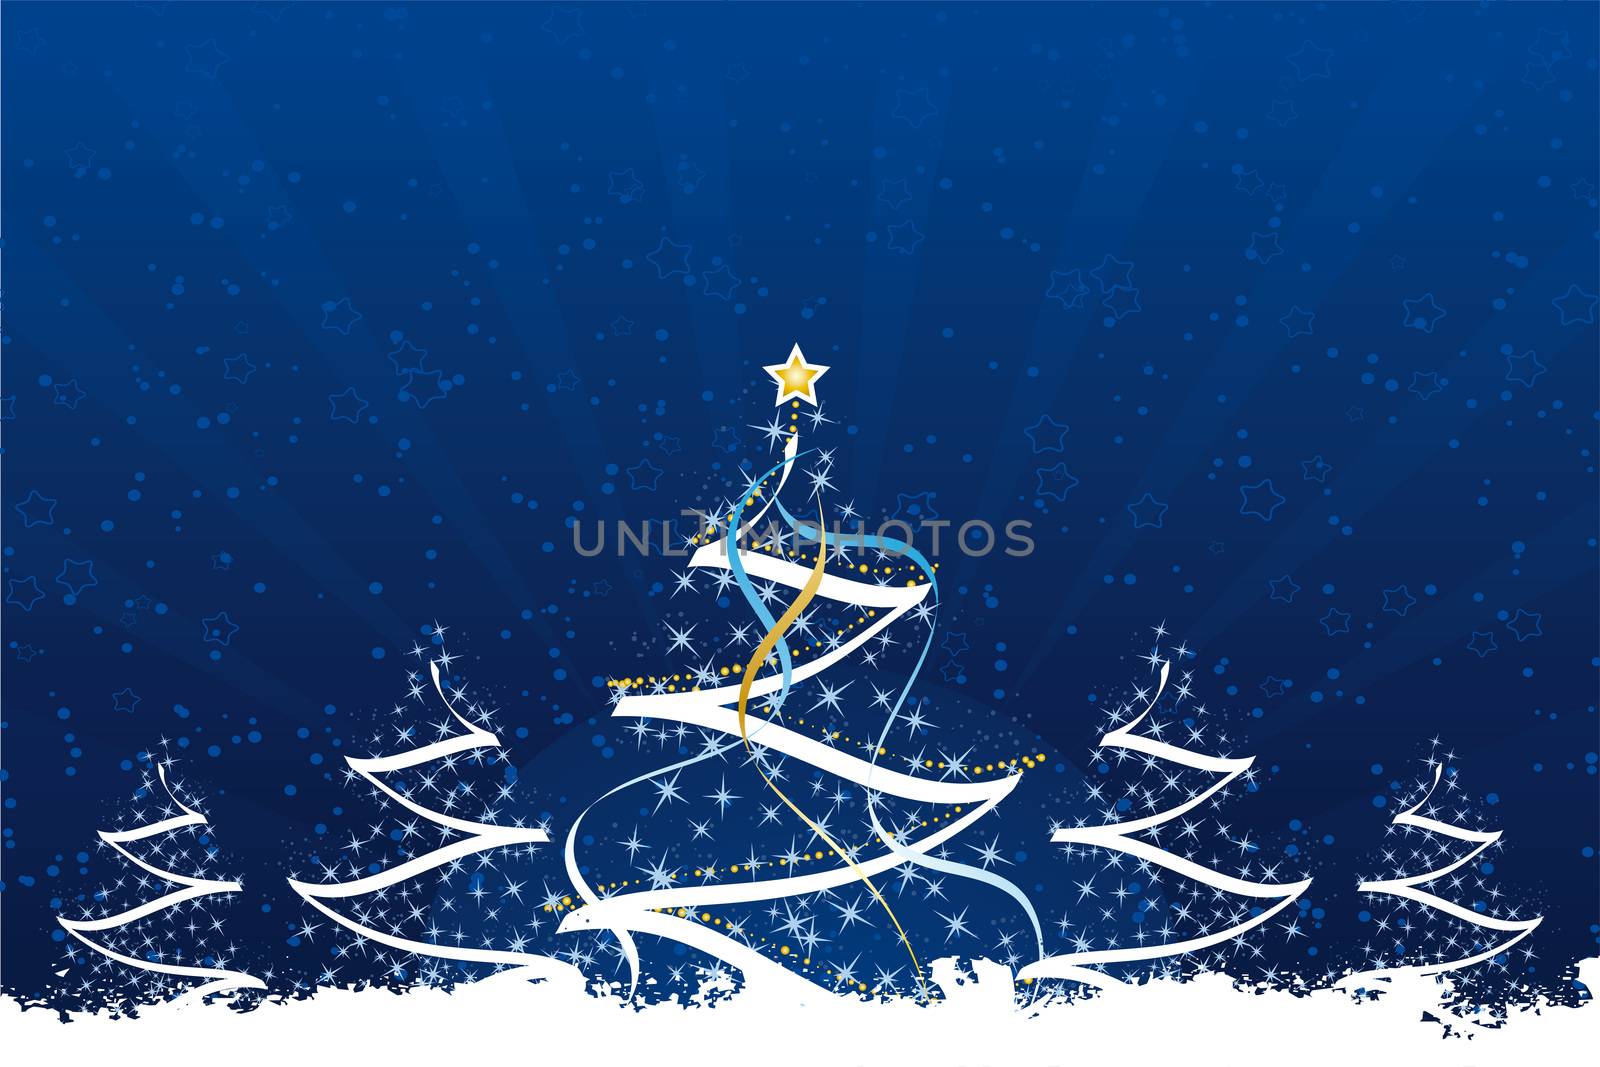 Grunge Christmas trees with stars and decoration in dark blue